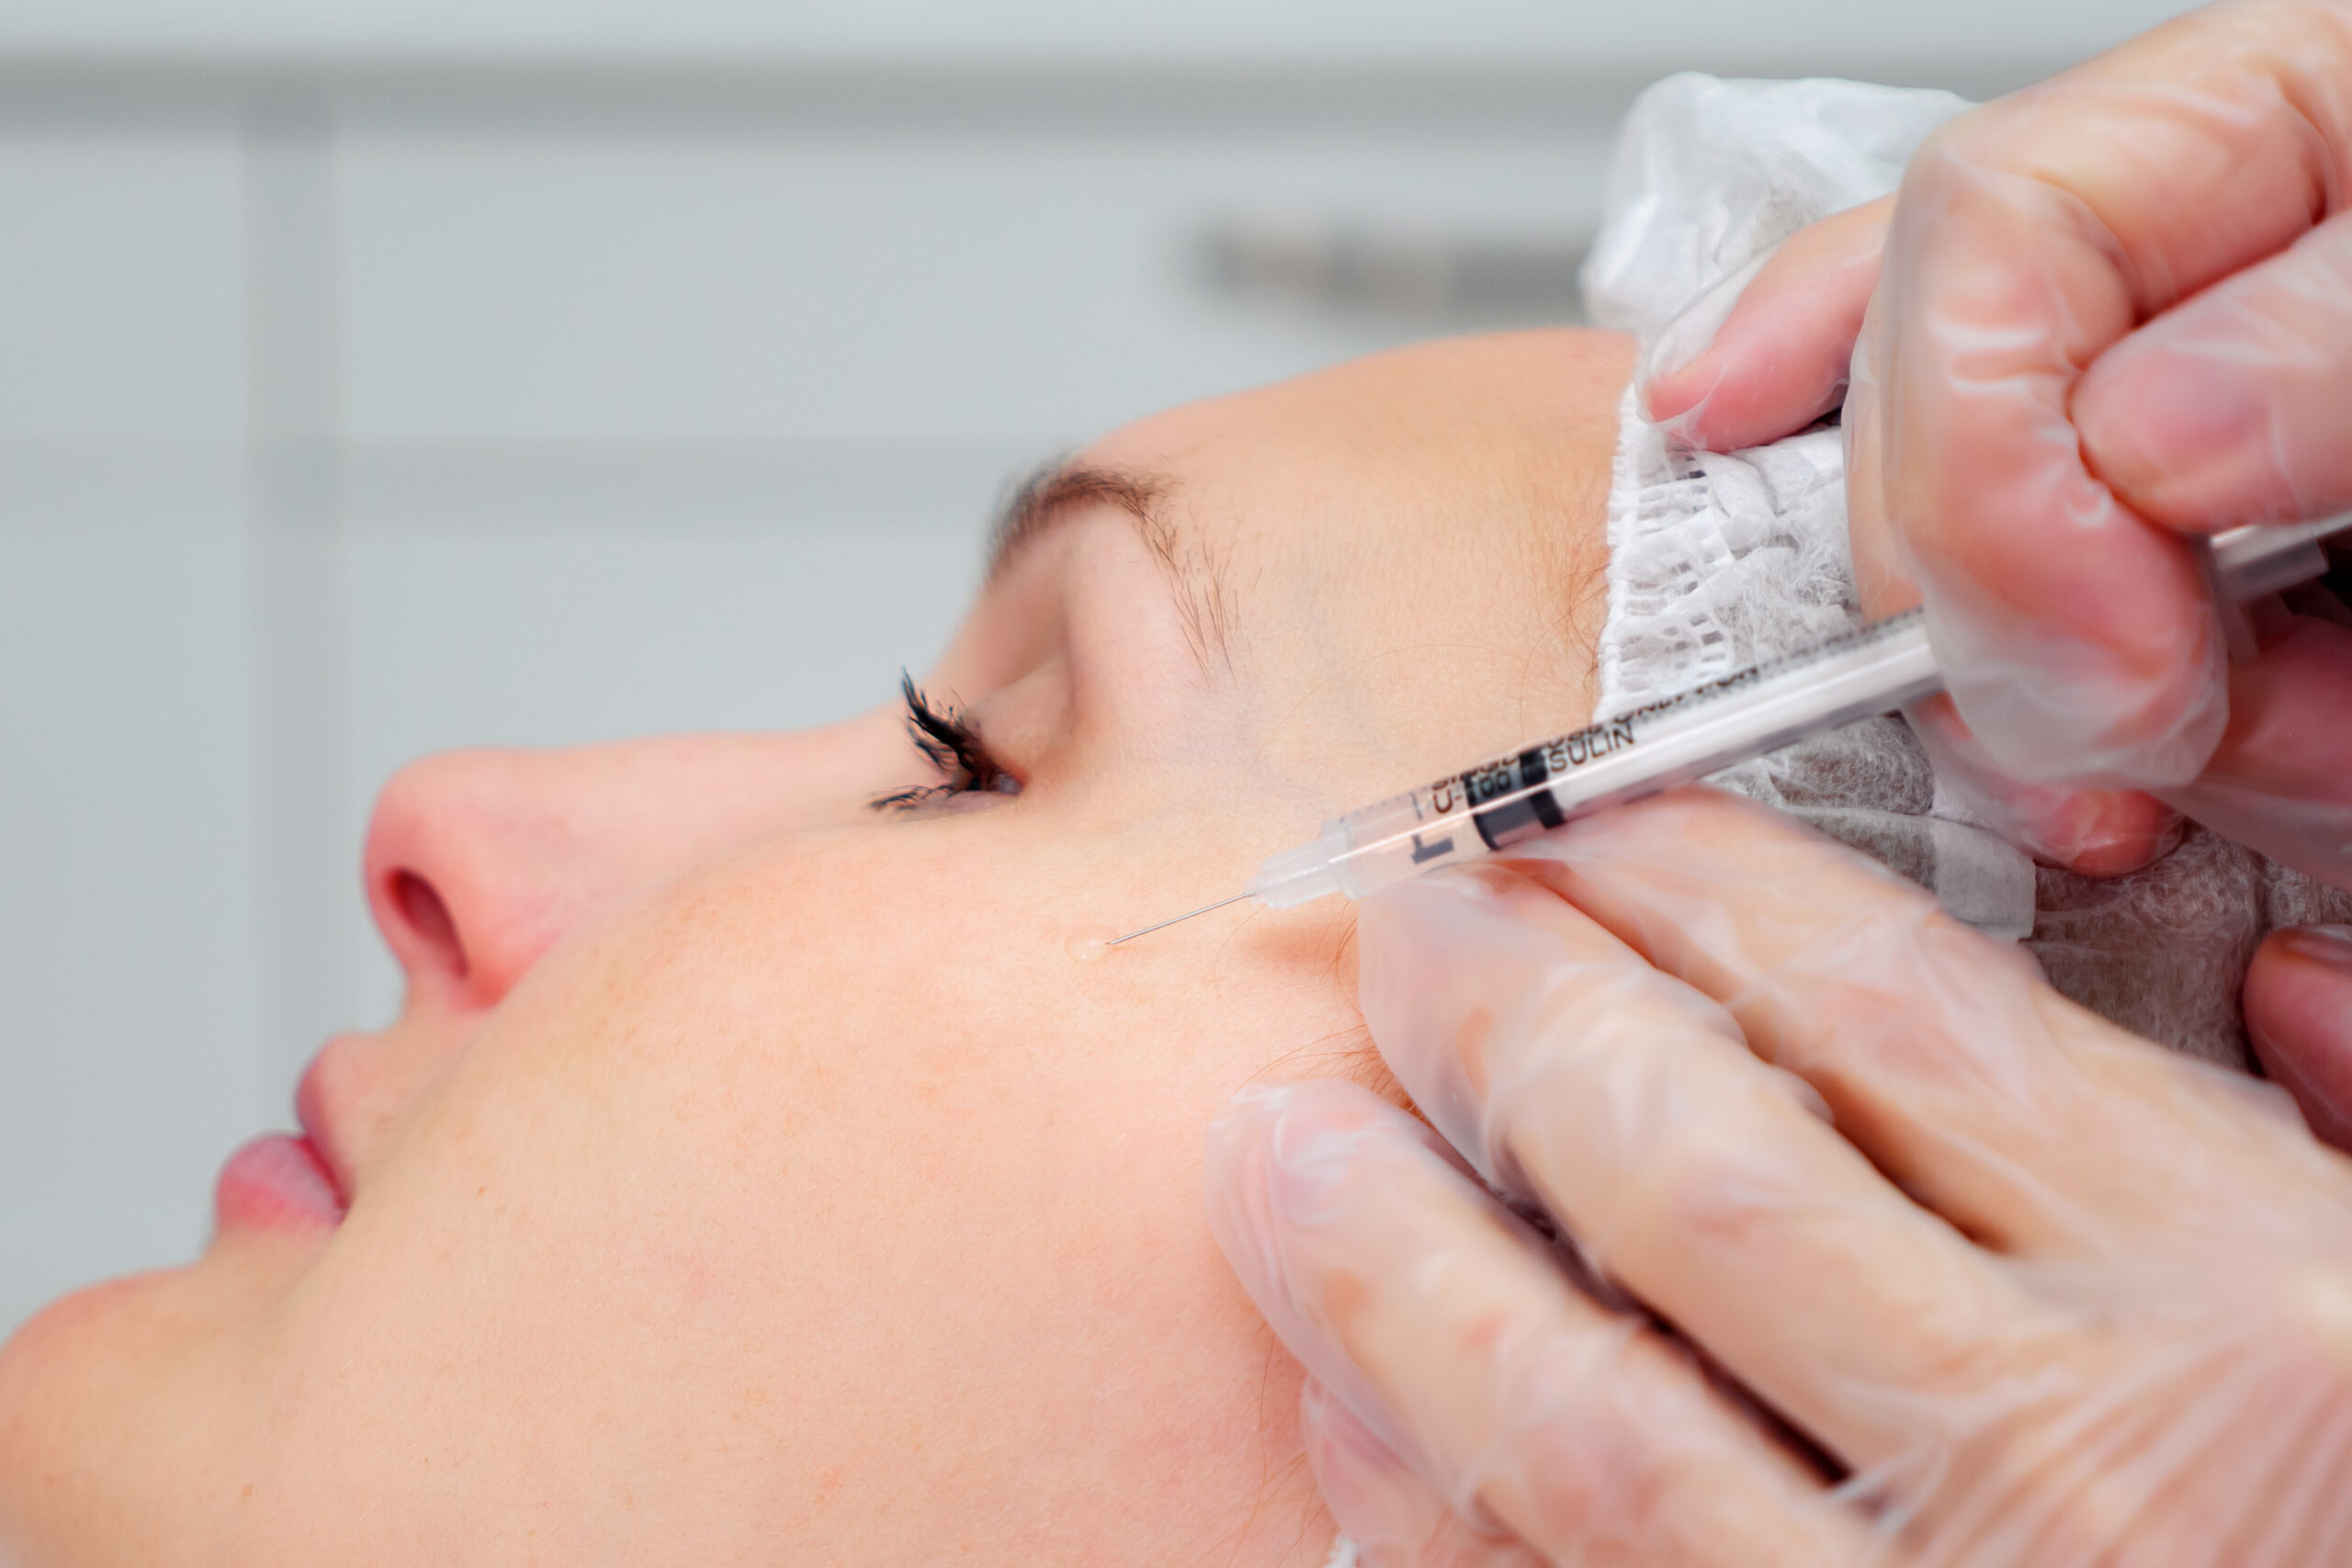 What are the advantages and disadvantages of fat dissolving injections?